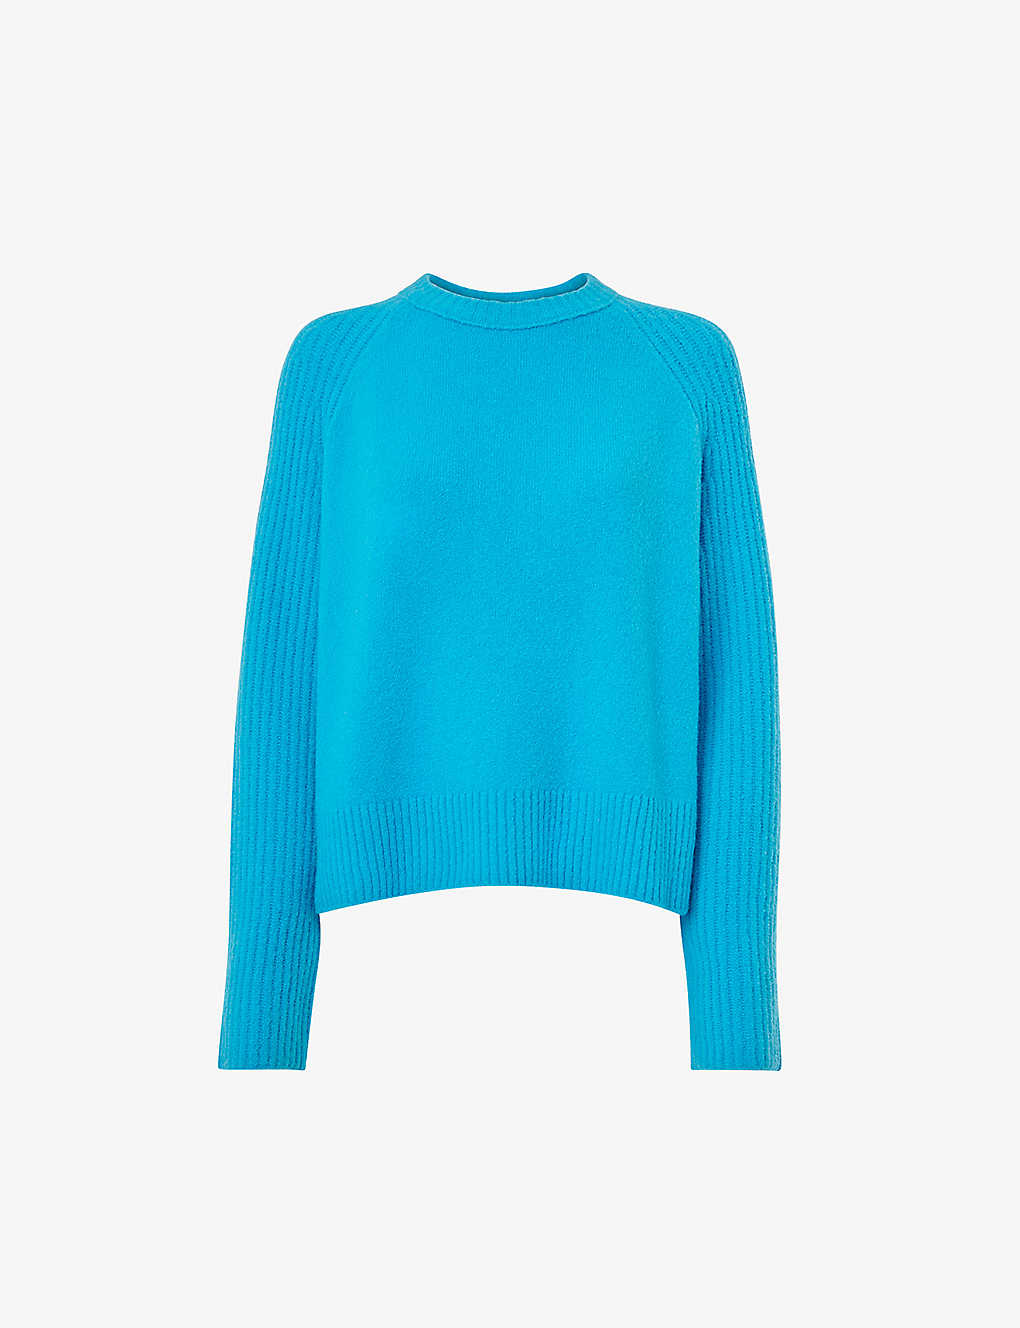 Whistles Anna Mixed Knit Sweater In Turquoise